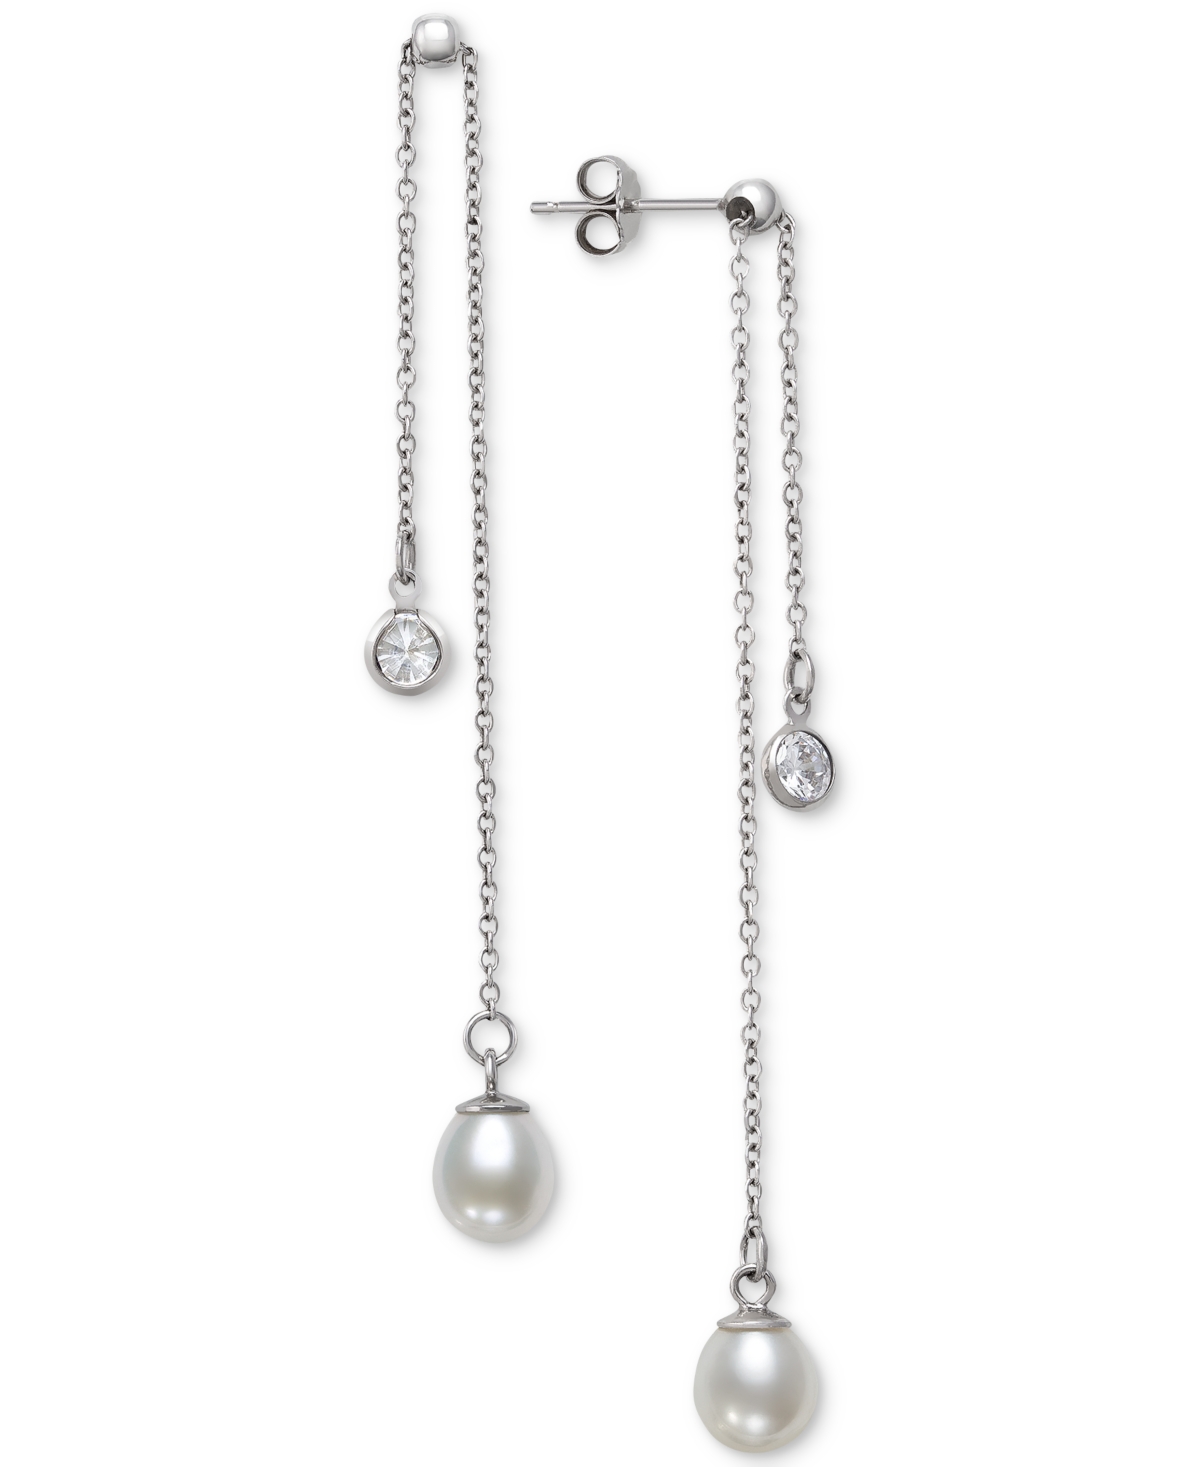 Cultured Freshwater Pearl (6-7mm) & Cubic Zirconia Double Chain Drop Earrings in Sterling Silver, Created for Macy's - Sterling Silver